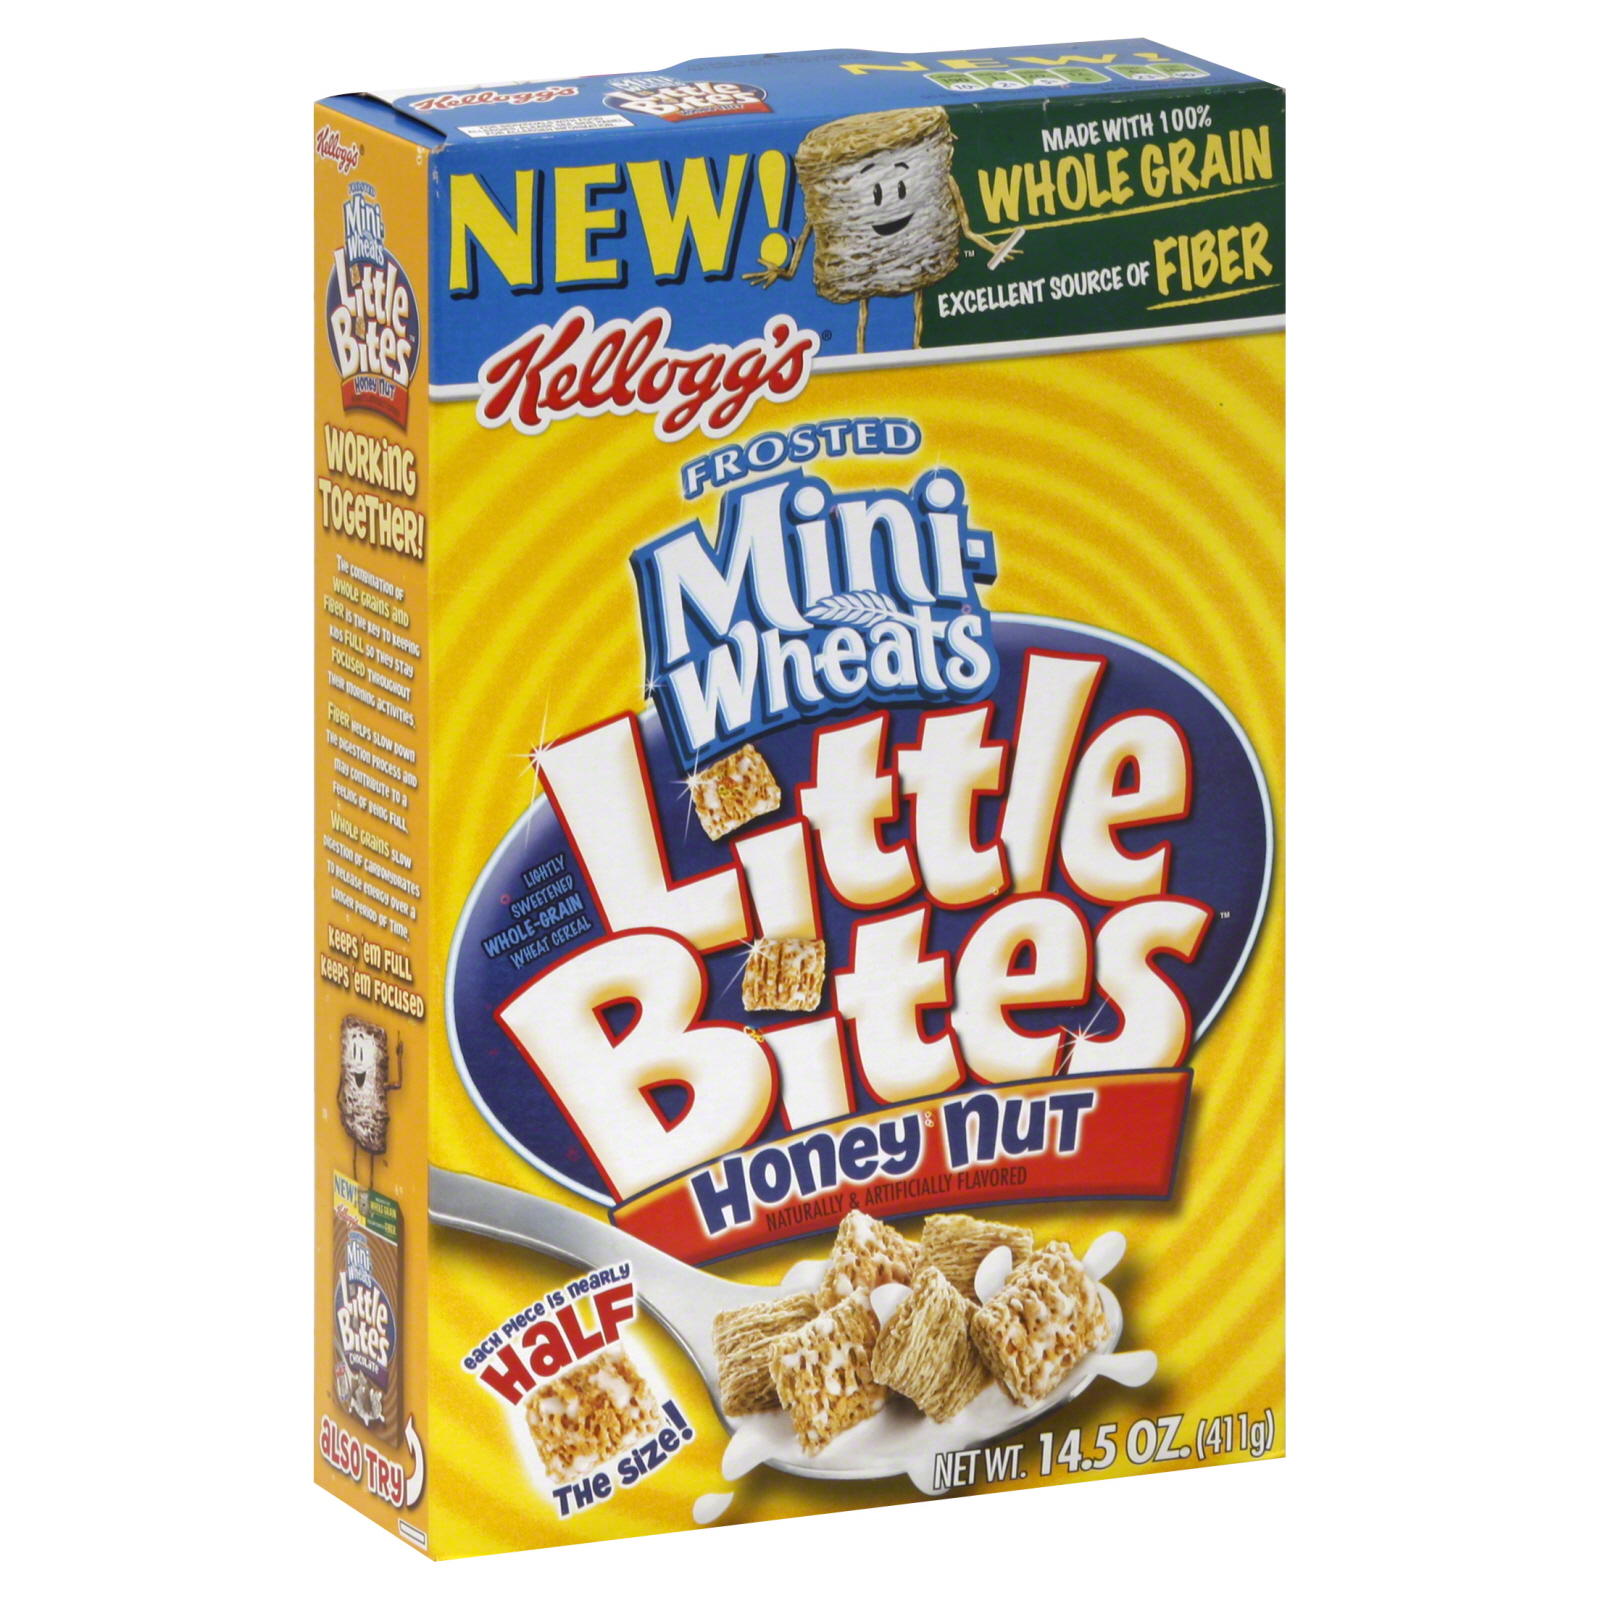 Mini-Wheats Frosted Cereal, Little Bites, Honey Nut, 14.5 oz (411 g)